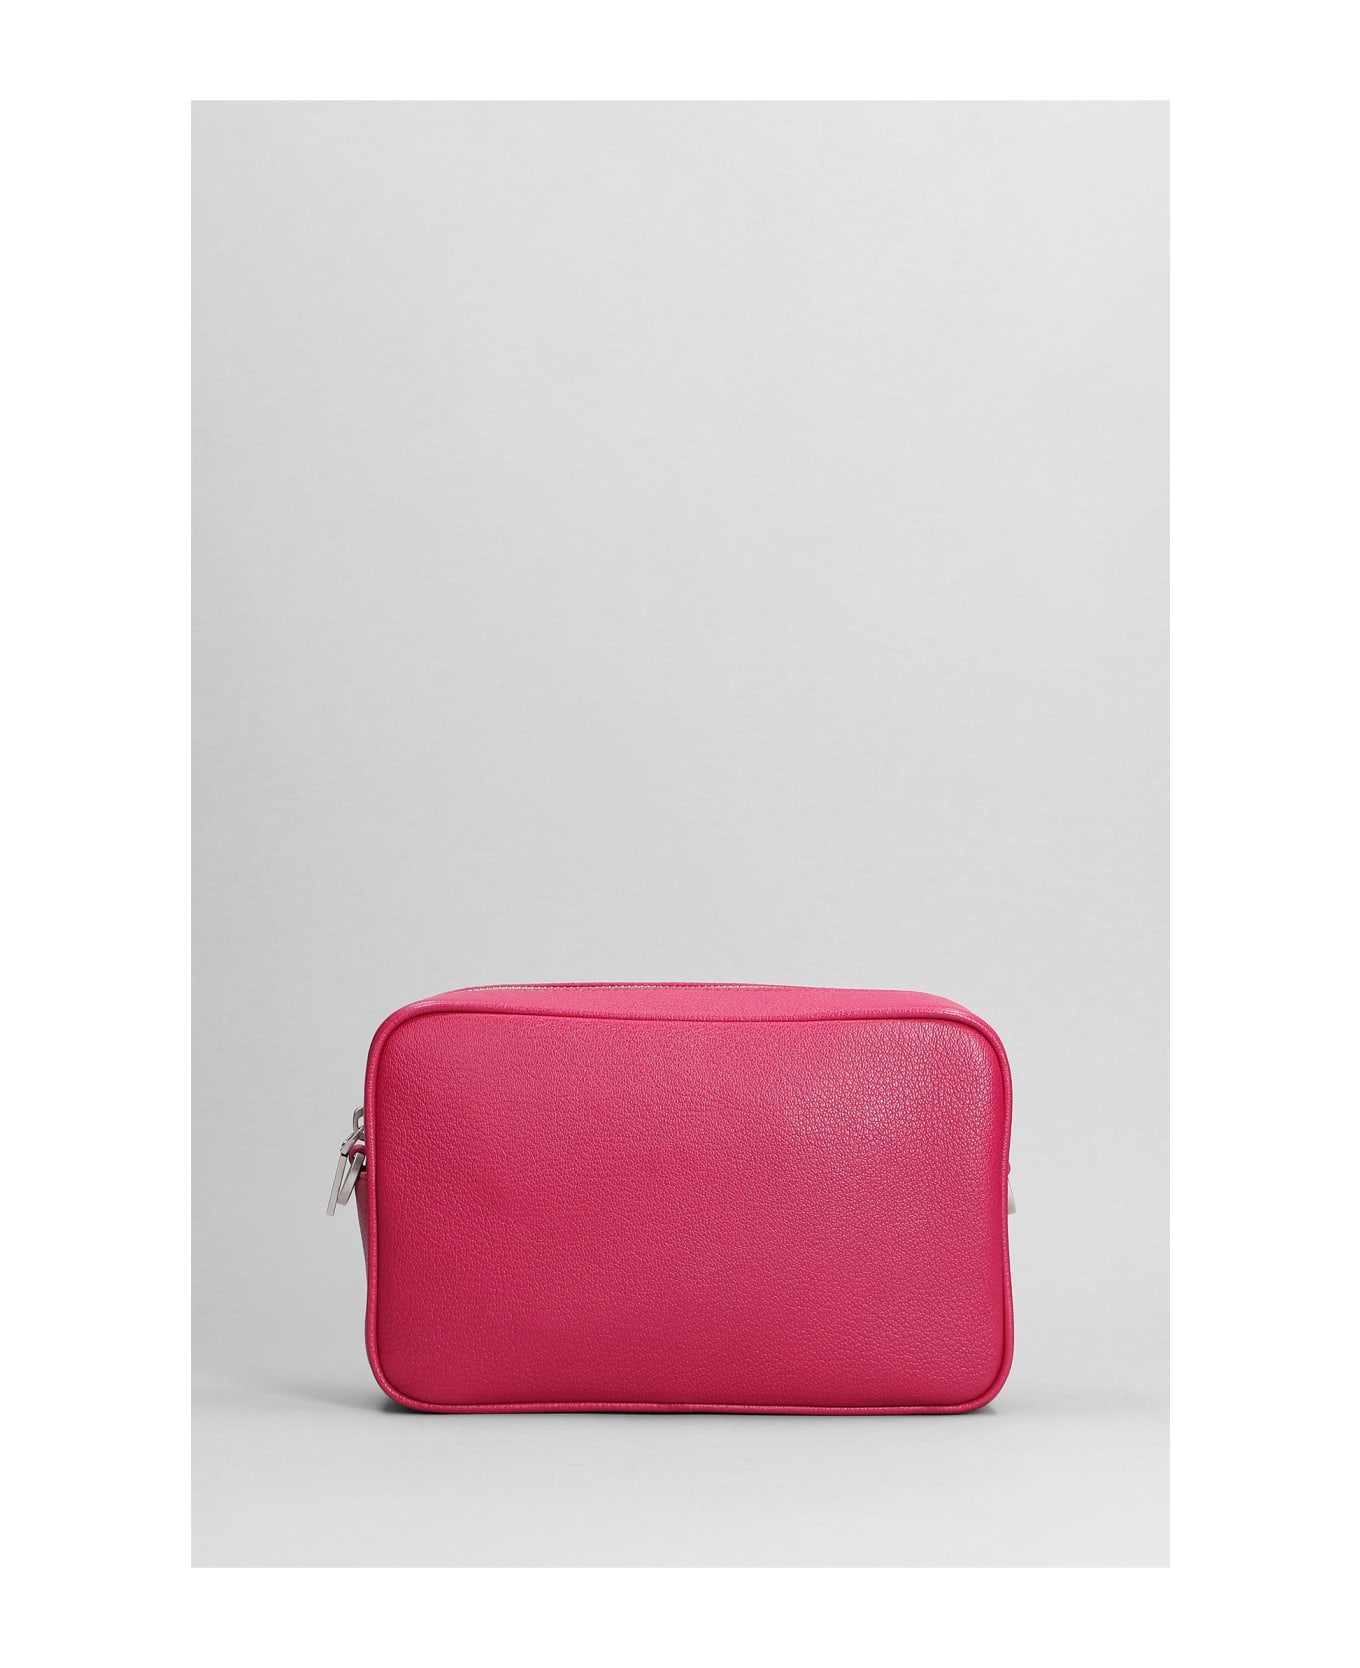 Golden Goose Shoulder Bag In Fuxia Leather - fuxia